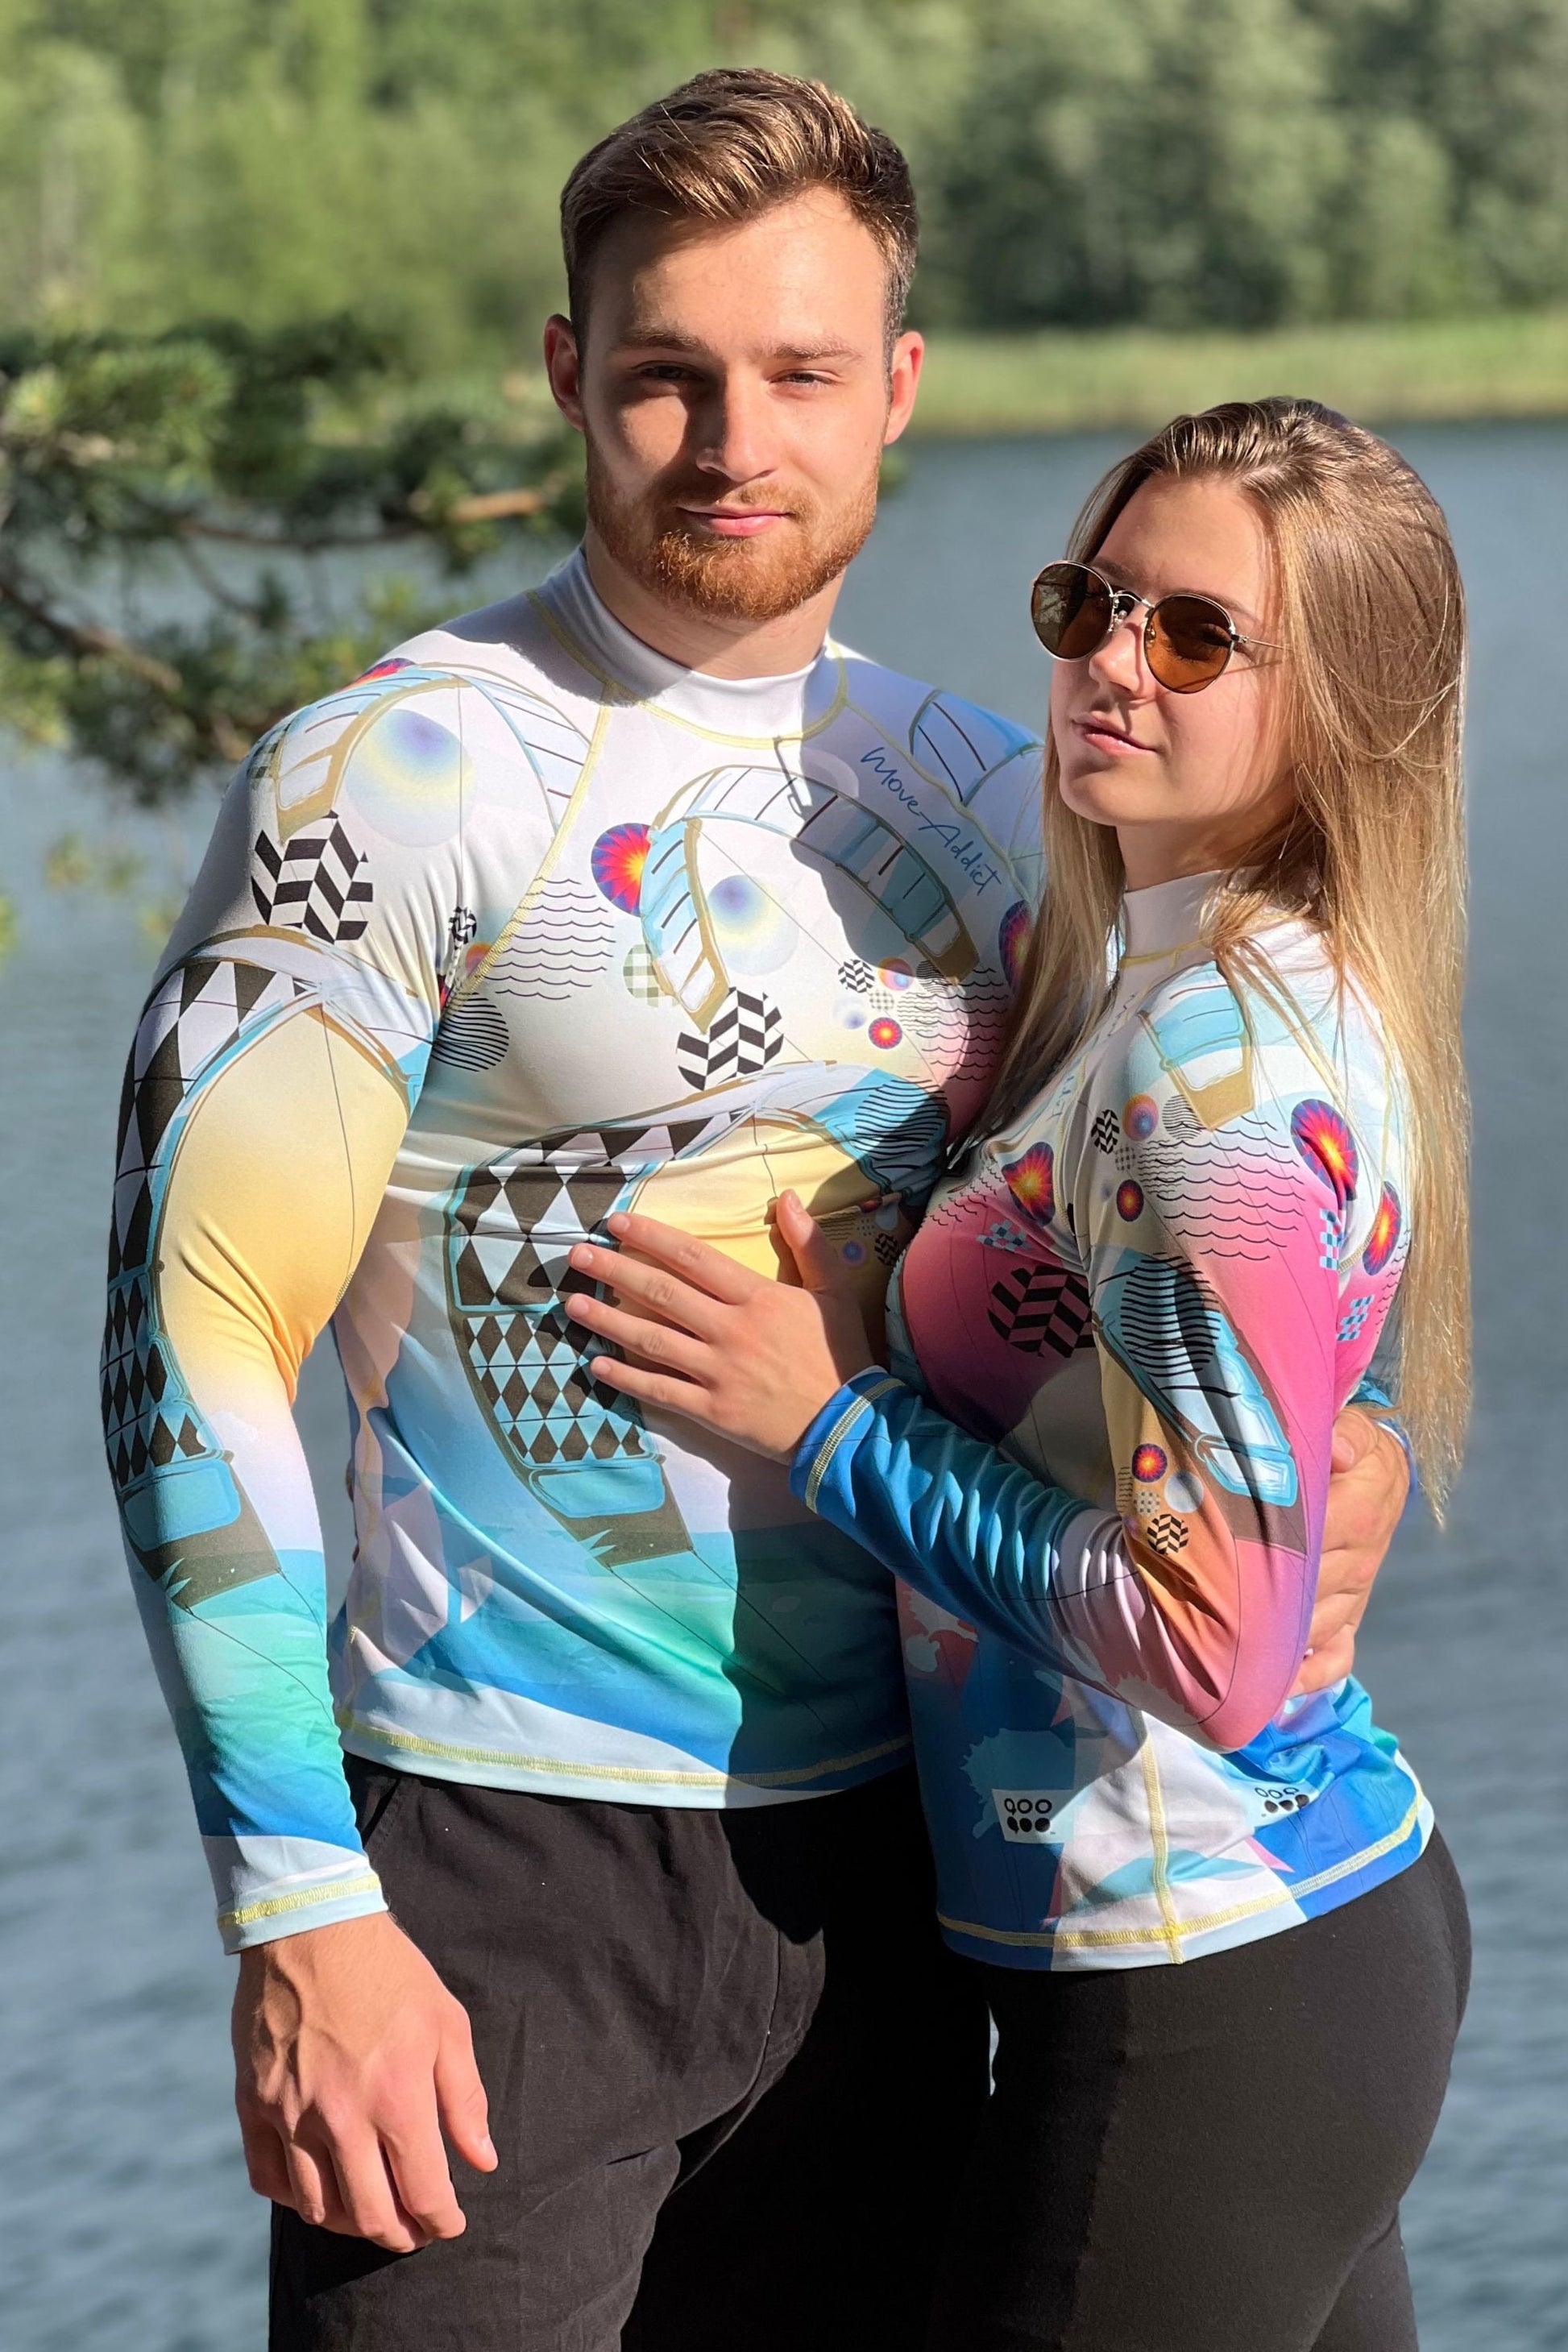 Women's Long Sleeve Rash Guard| Women's Lycra, Rash| Summer water sports outfit| Active lifestyle| Sun and wind protection